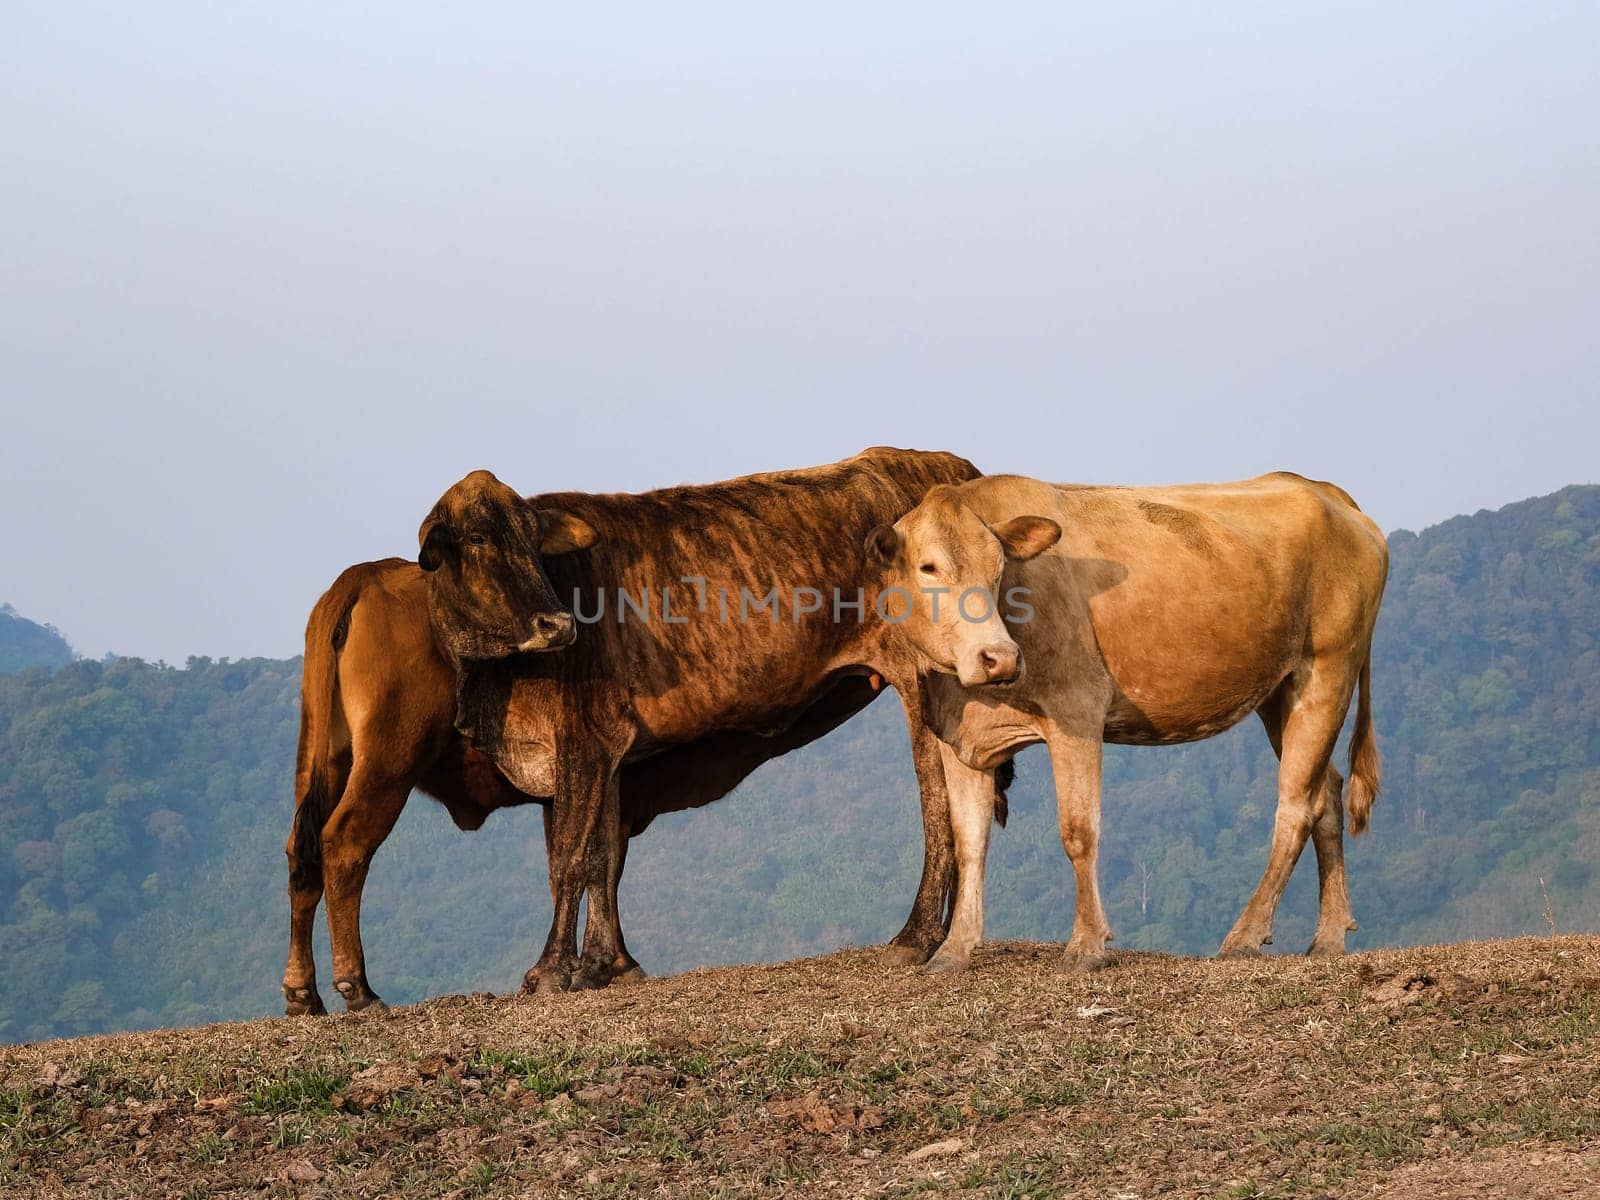 Herd of cows in summer meadow on mountain background. Herd of white and brown cows grazing on an autumn morning in a mountain pasture. by TEERASAK